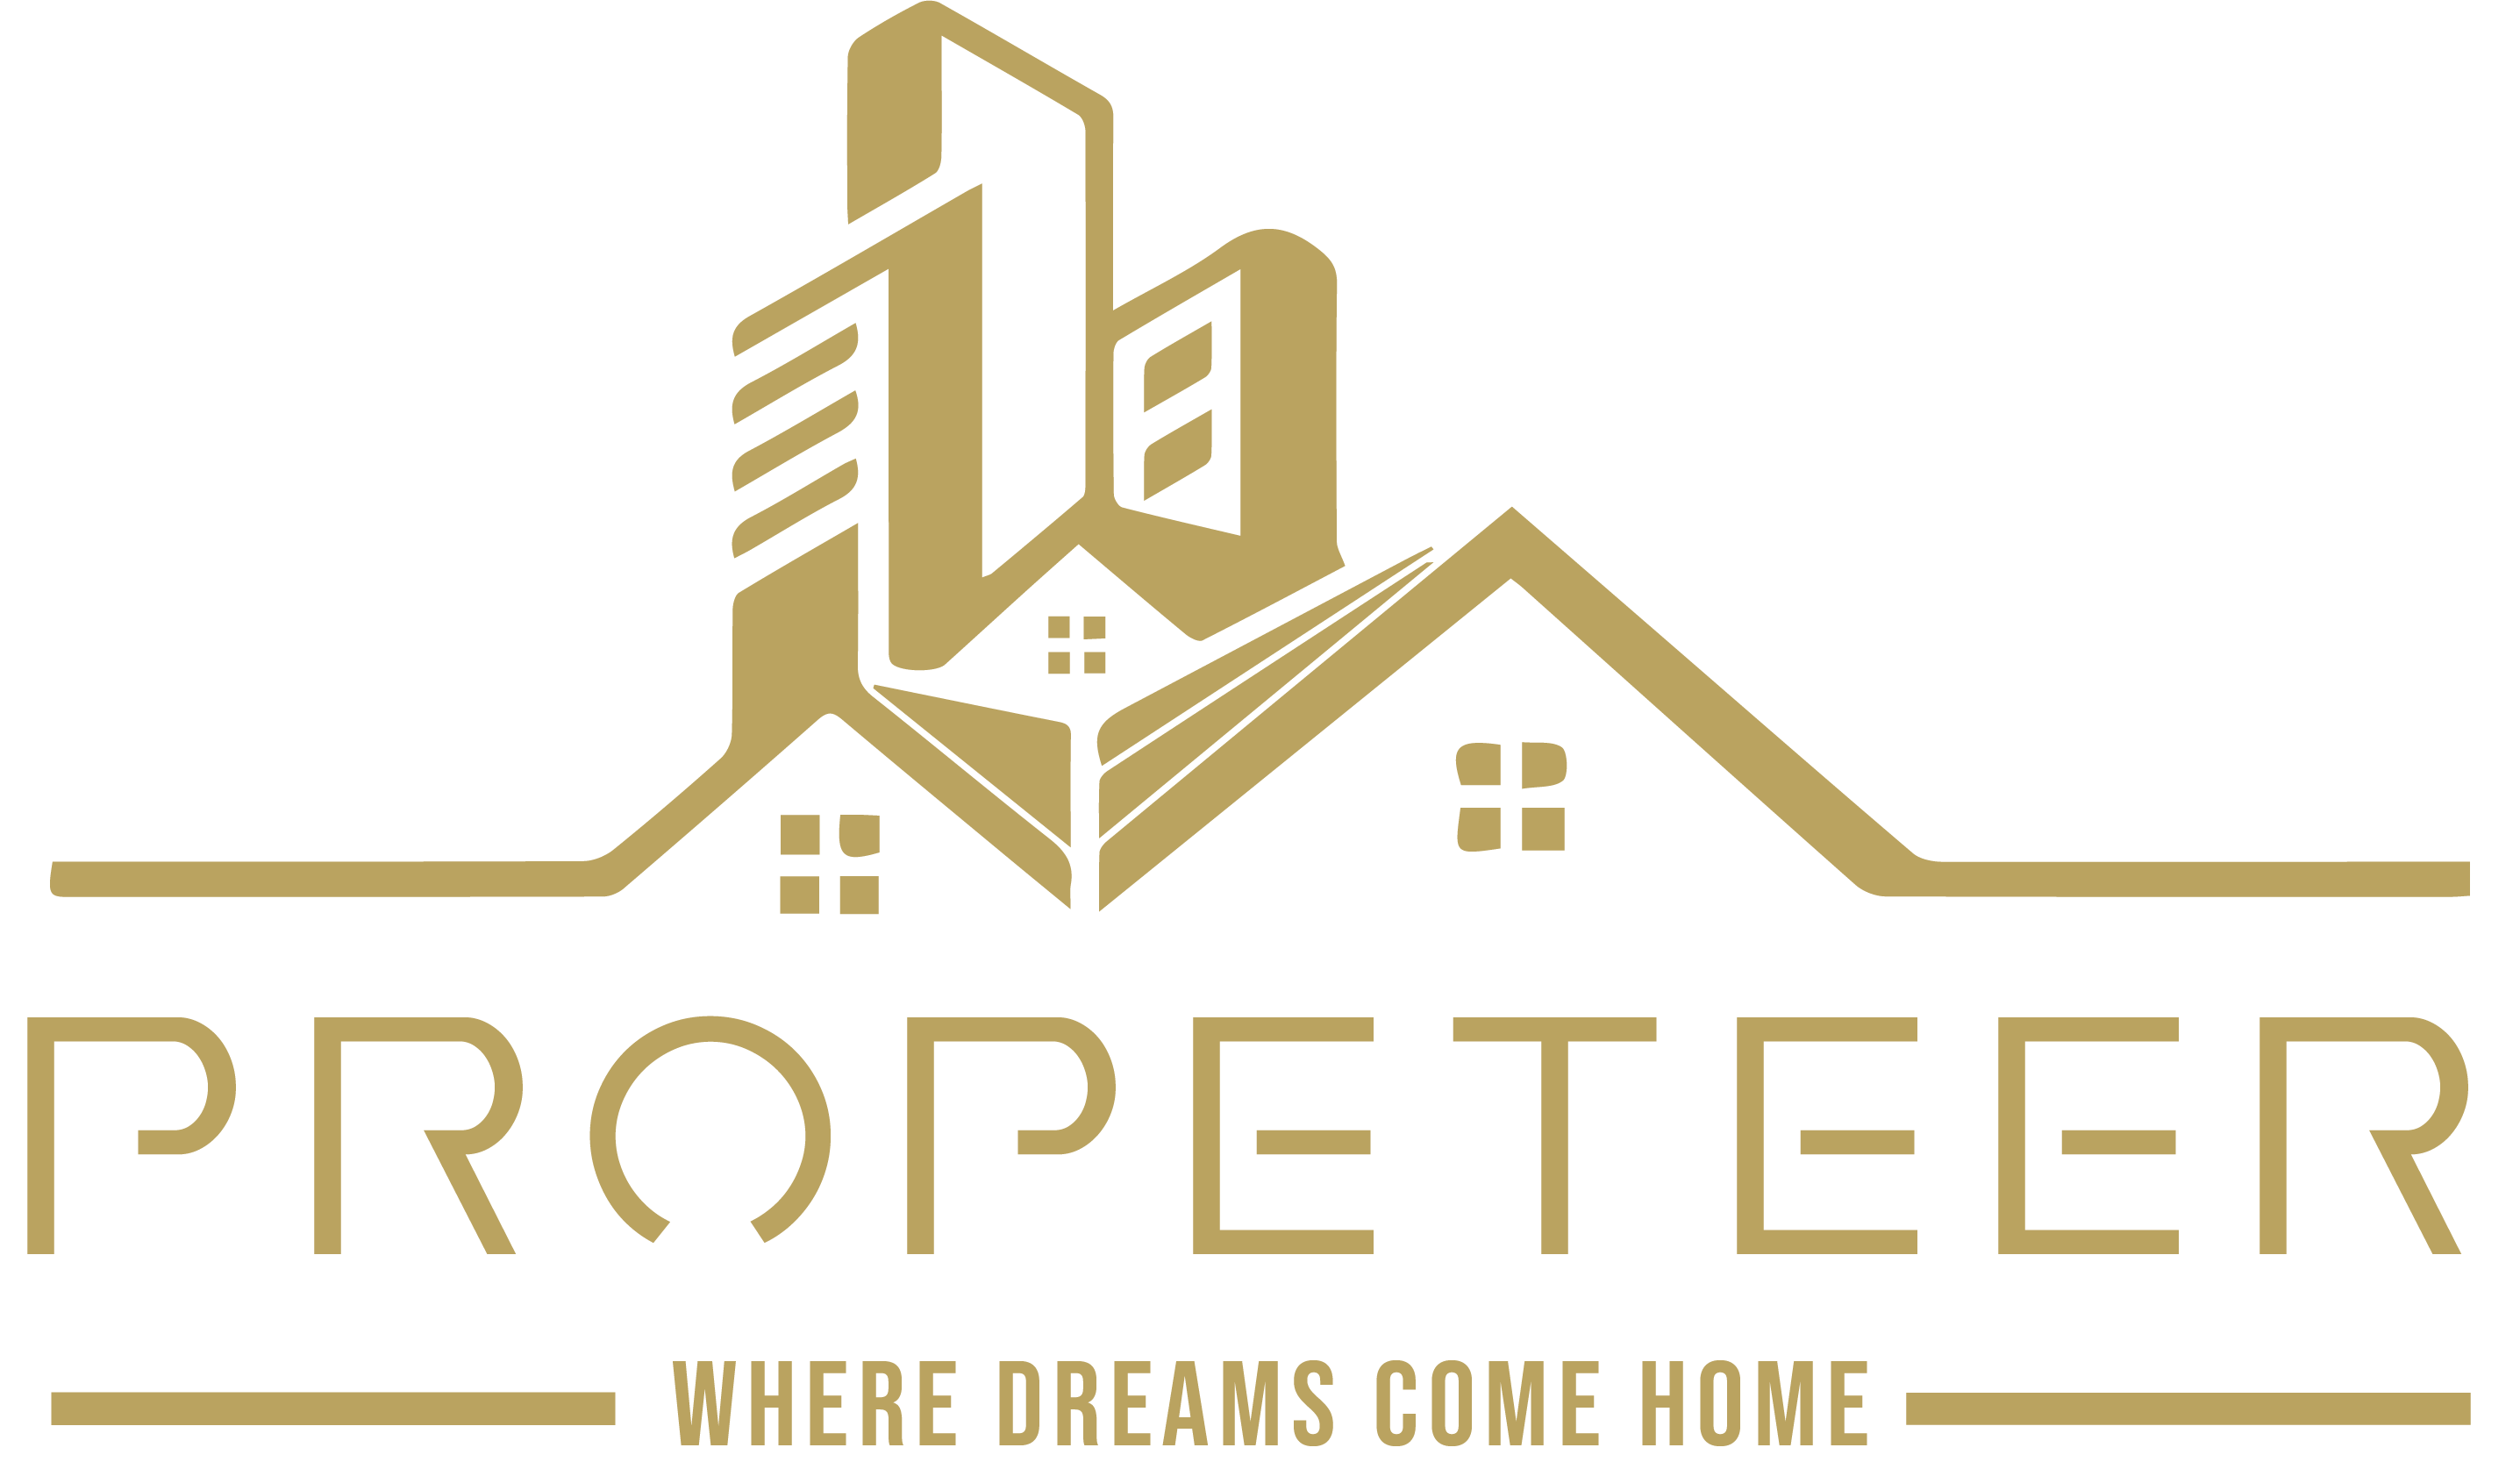 Propeteer - Expert in Property Solutions